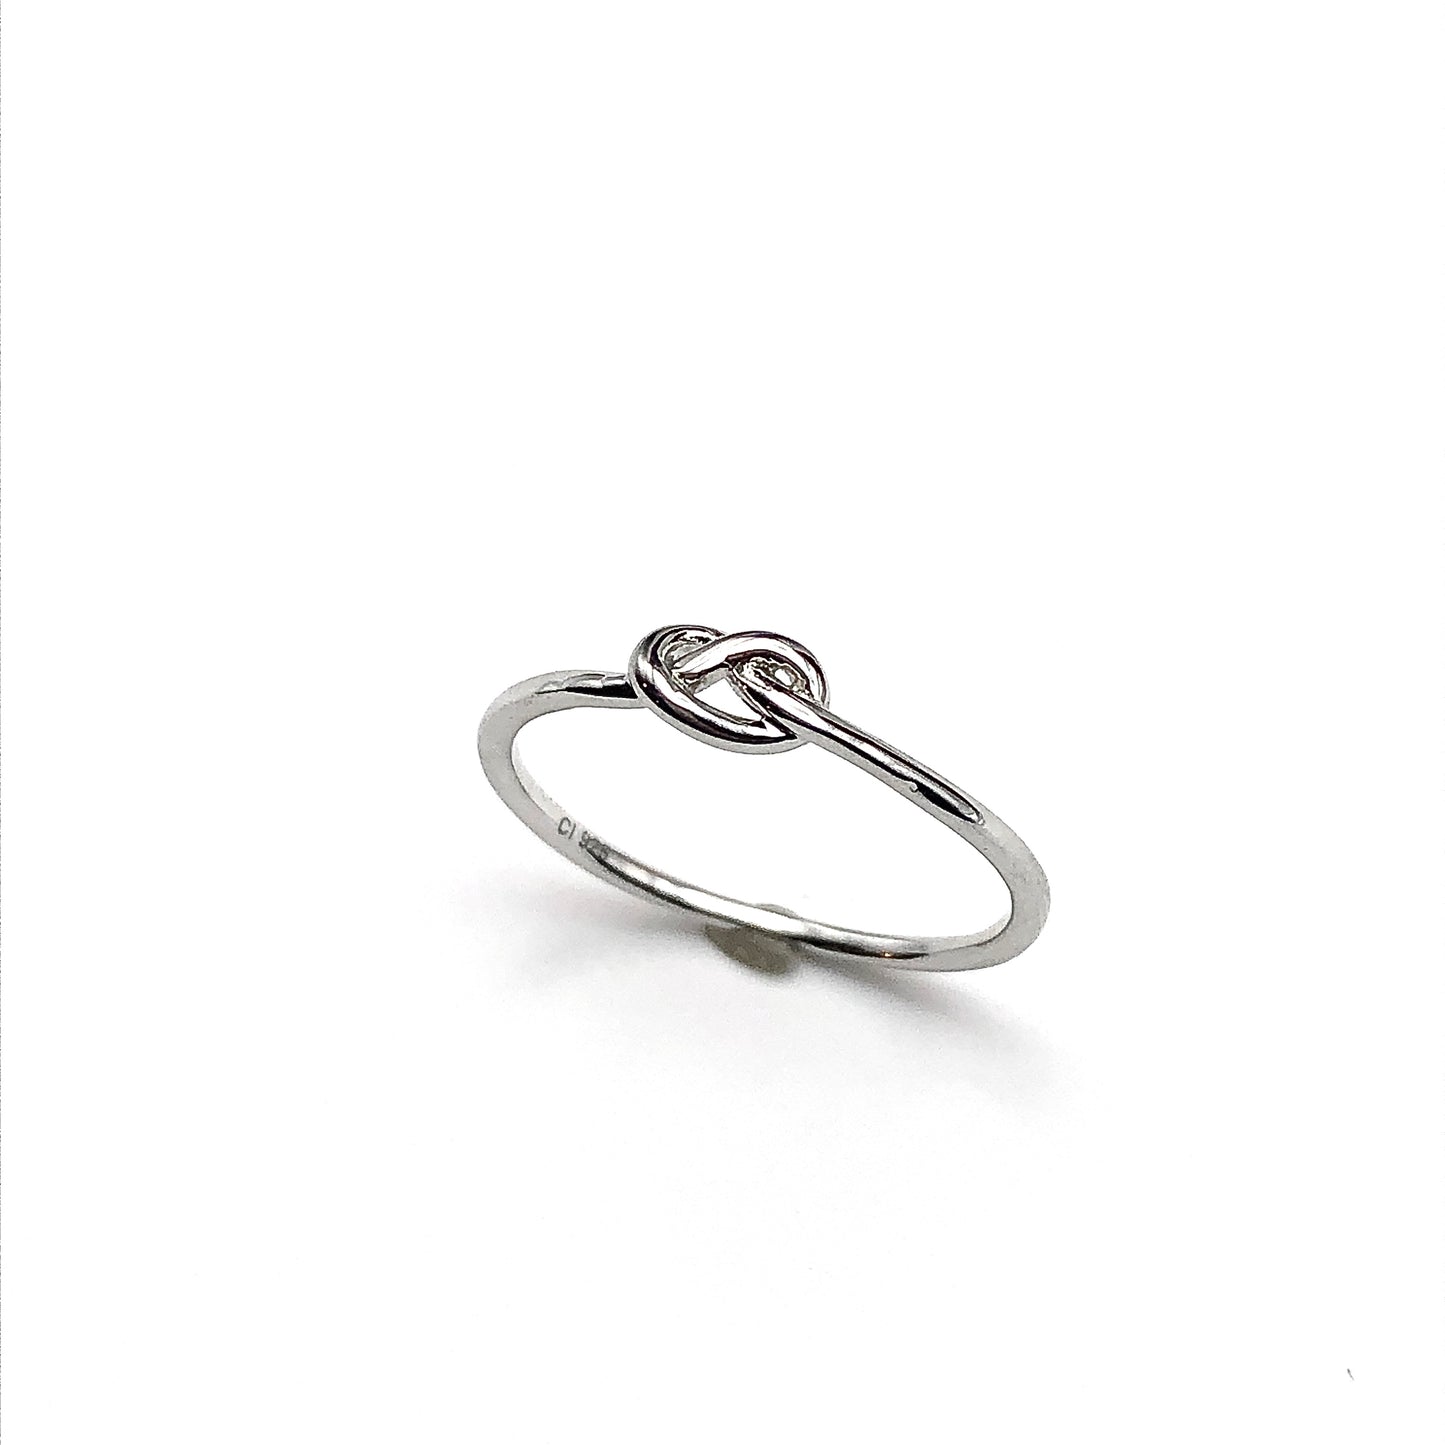 Sterling Silver Ring, sz7.25 Dainty Delicate Style Love Knot Design Thin Band Ring